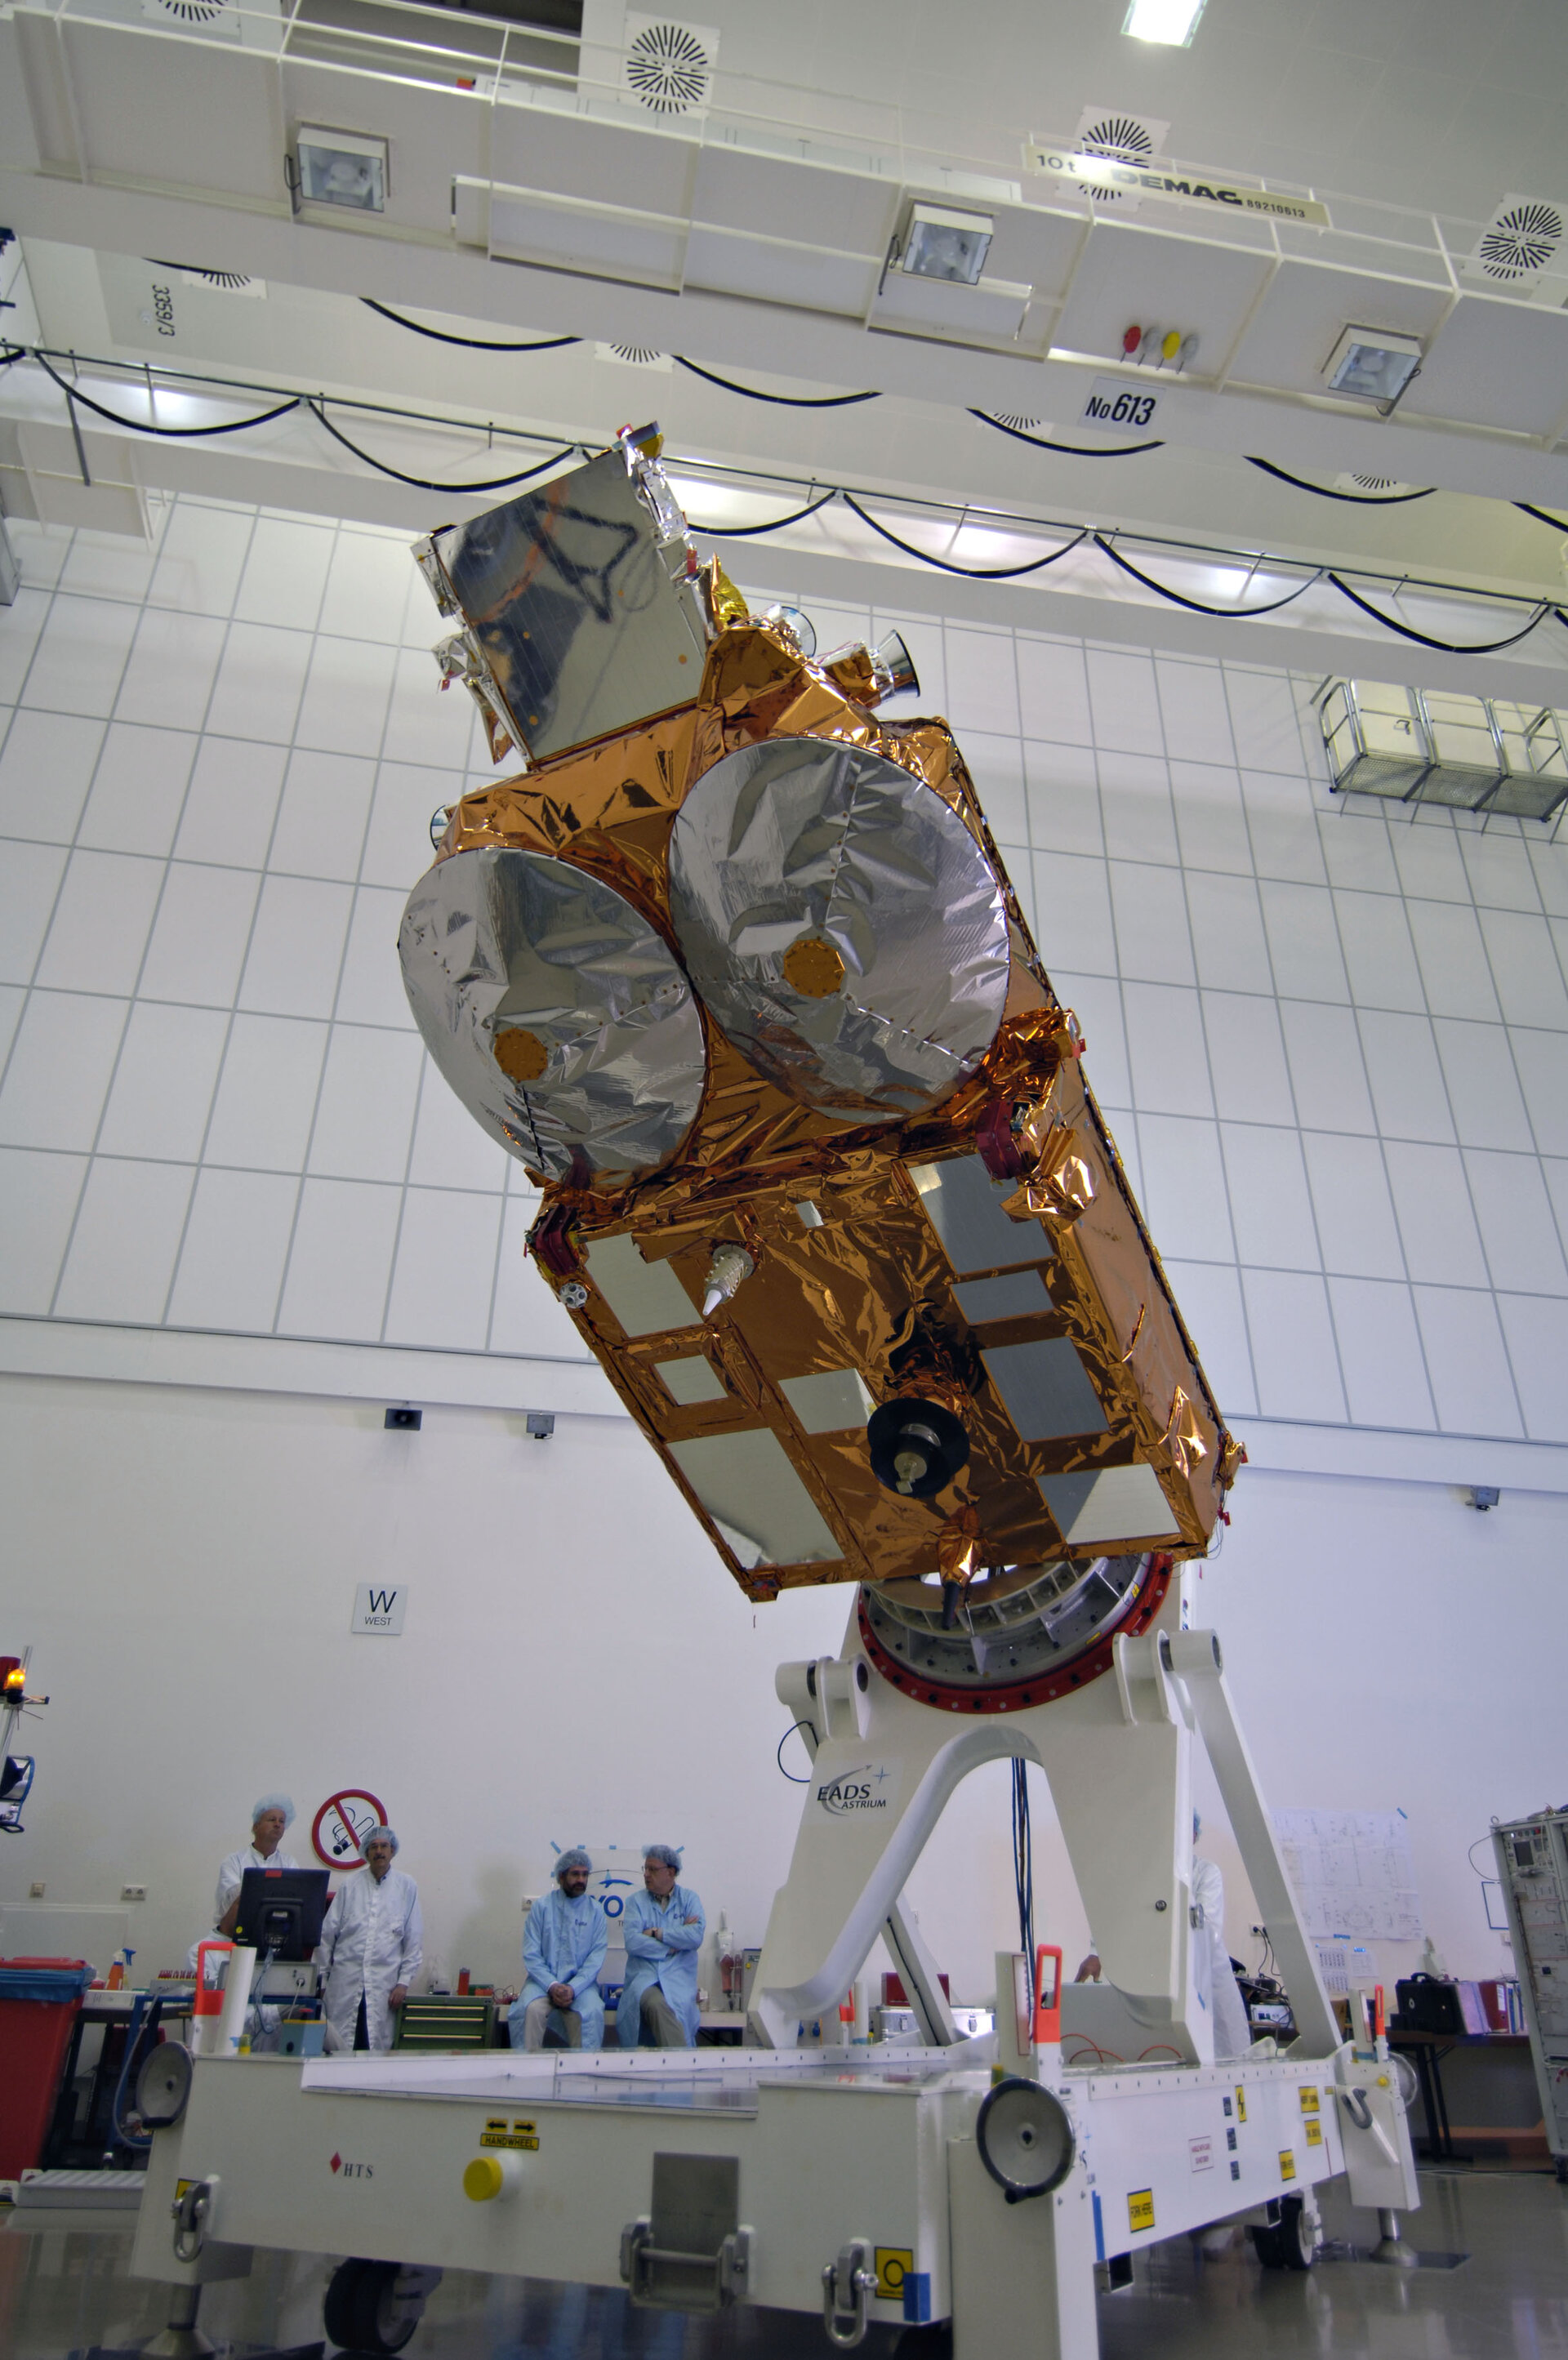 ESA's Cryosat satellite after completion of acoustic tests